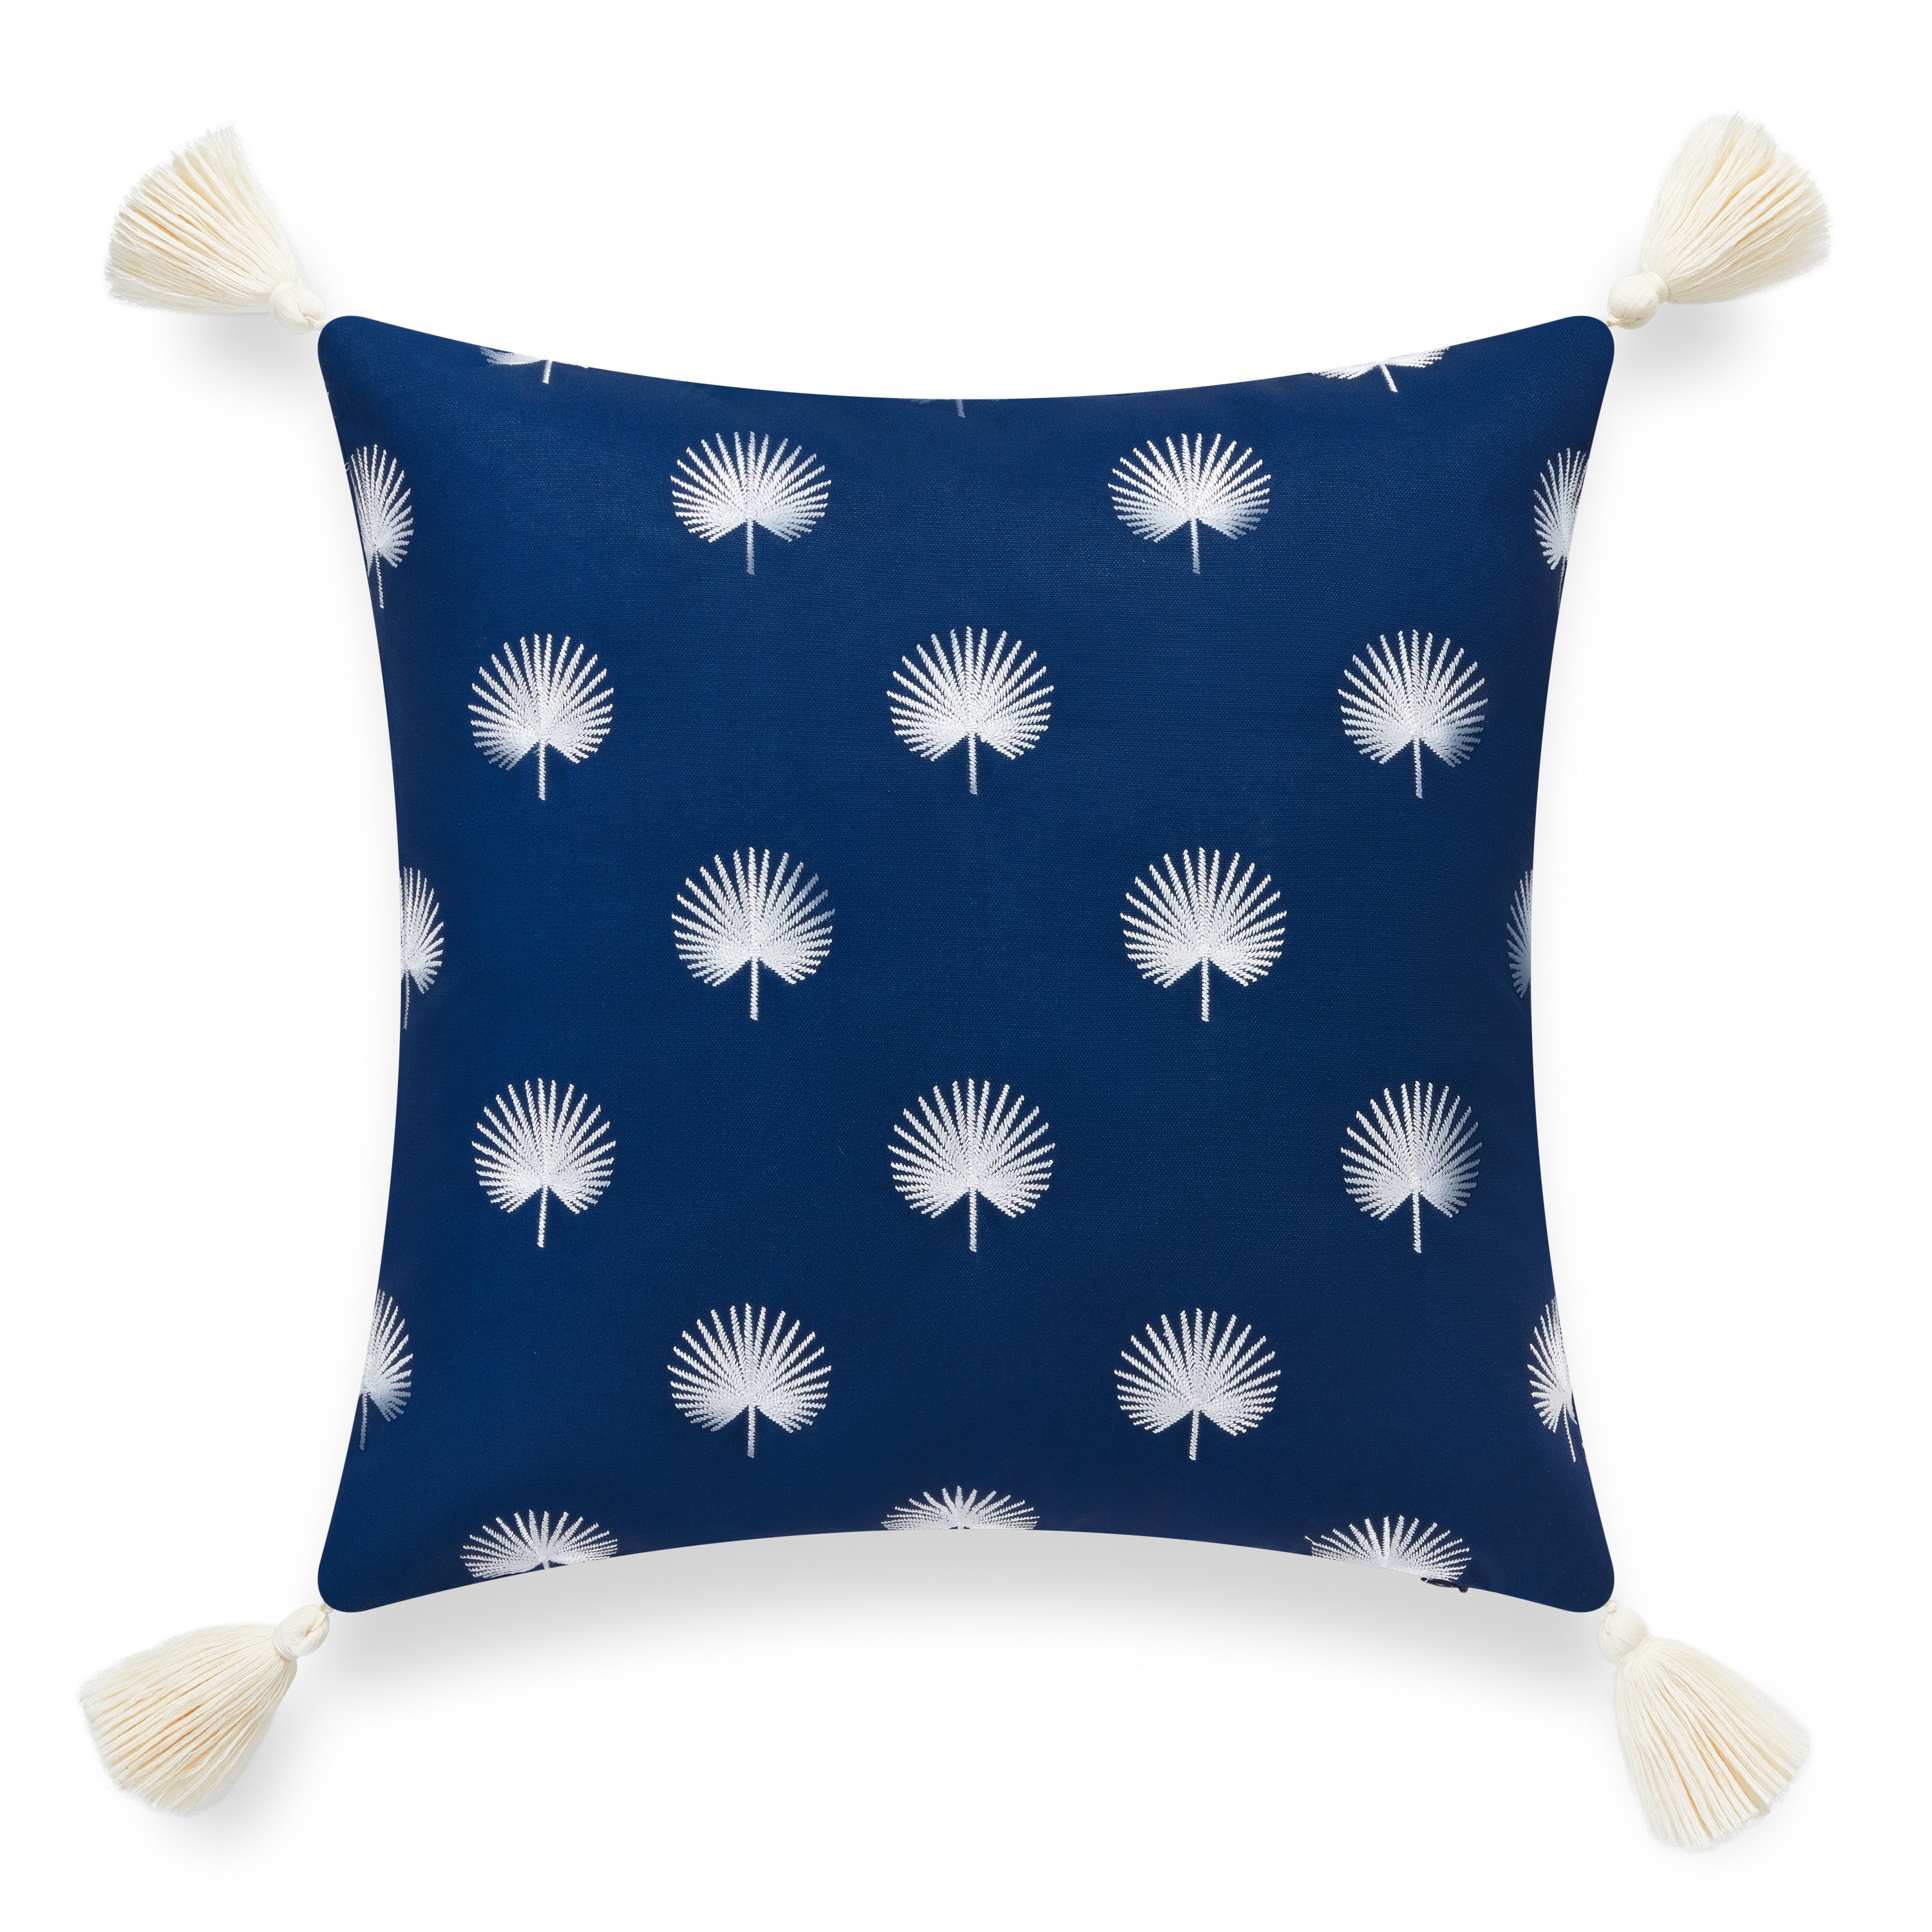 Coastal Hampton Style Indoor Outdoor Throw Pillow Cover, Embroidered Palm Leaf Tassel, Navy Blue, 18"x18"